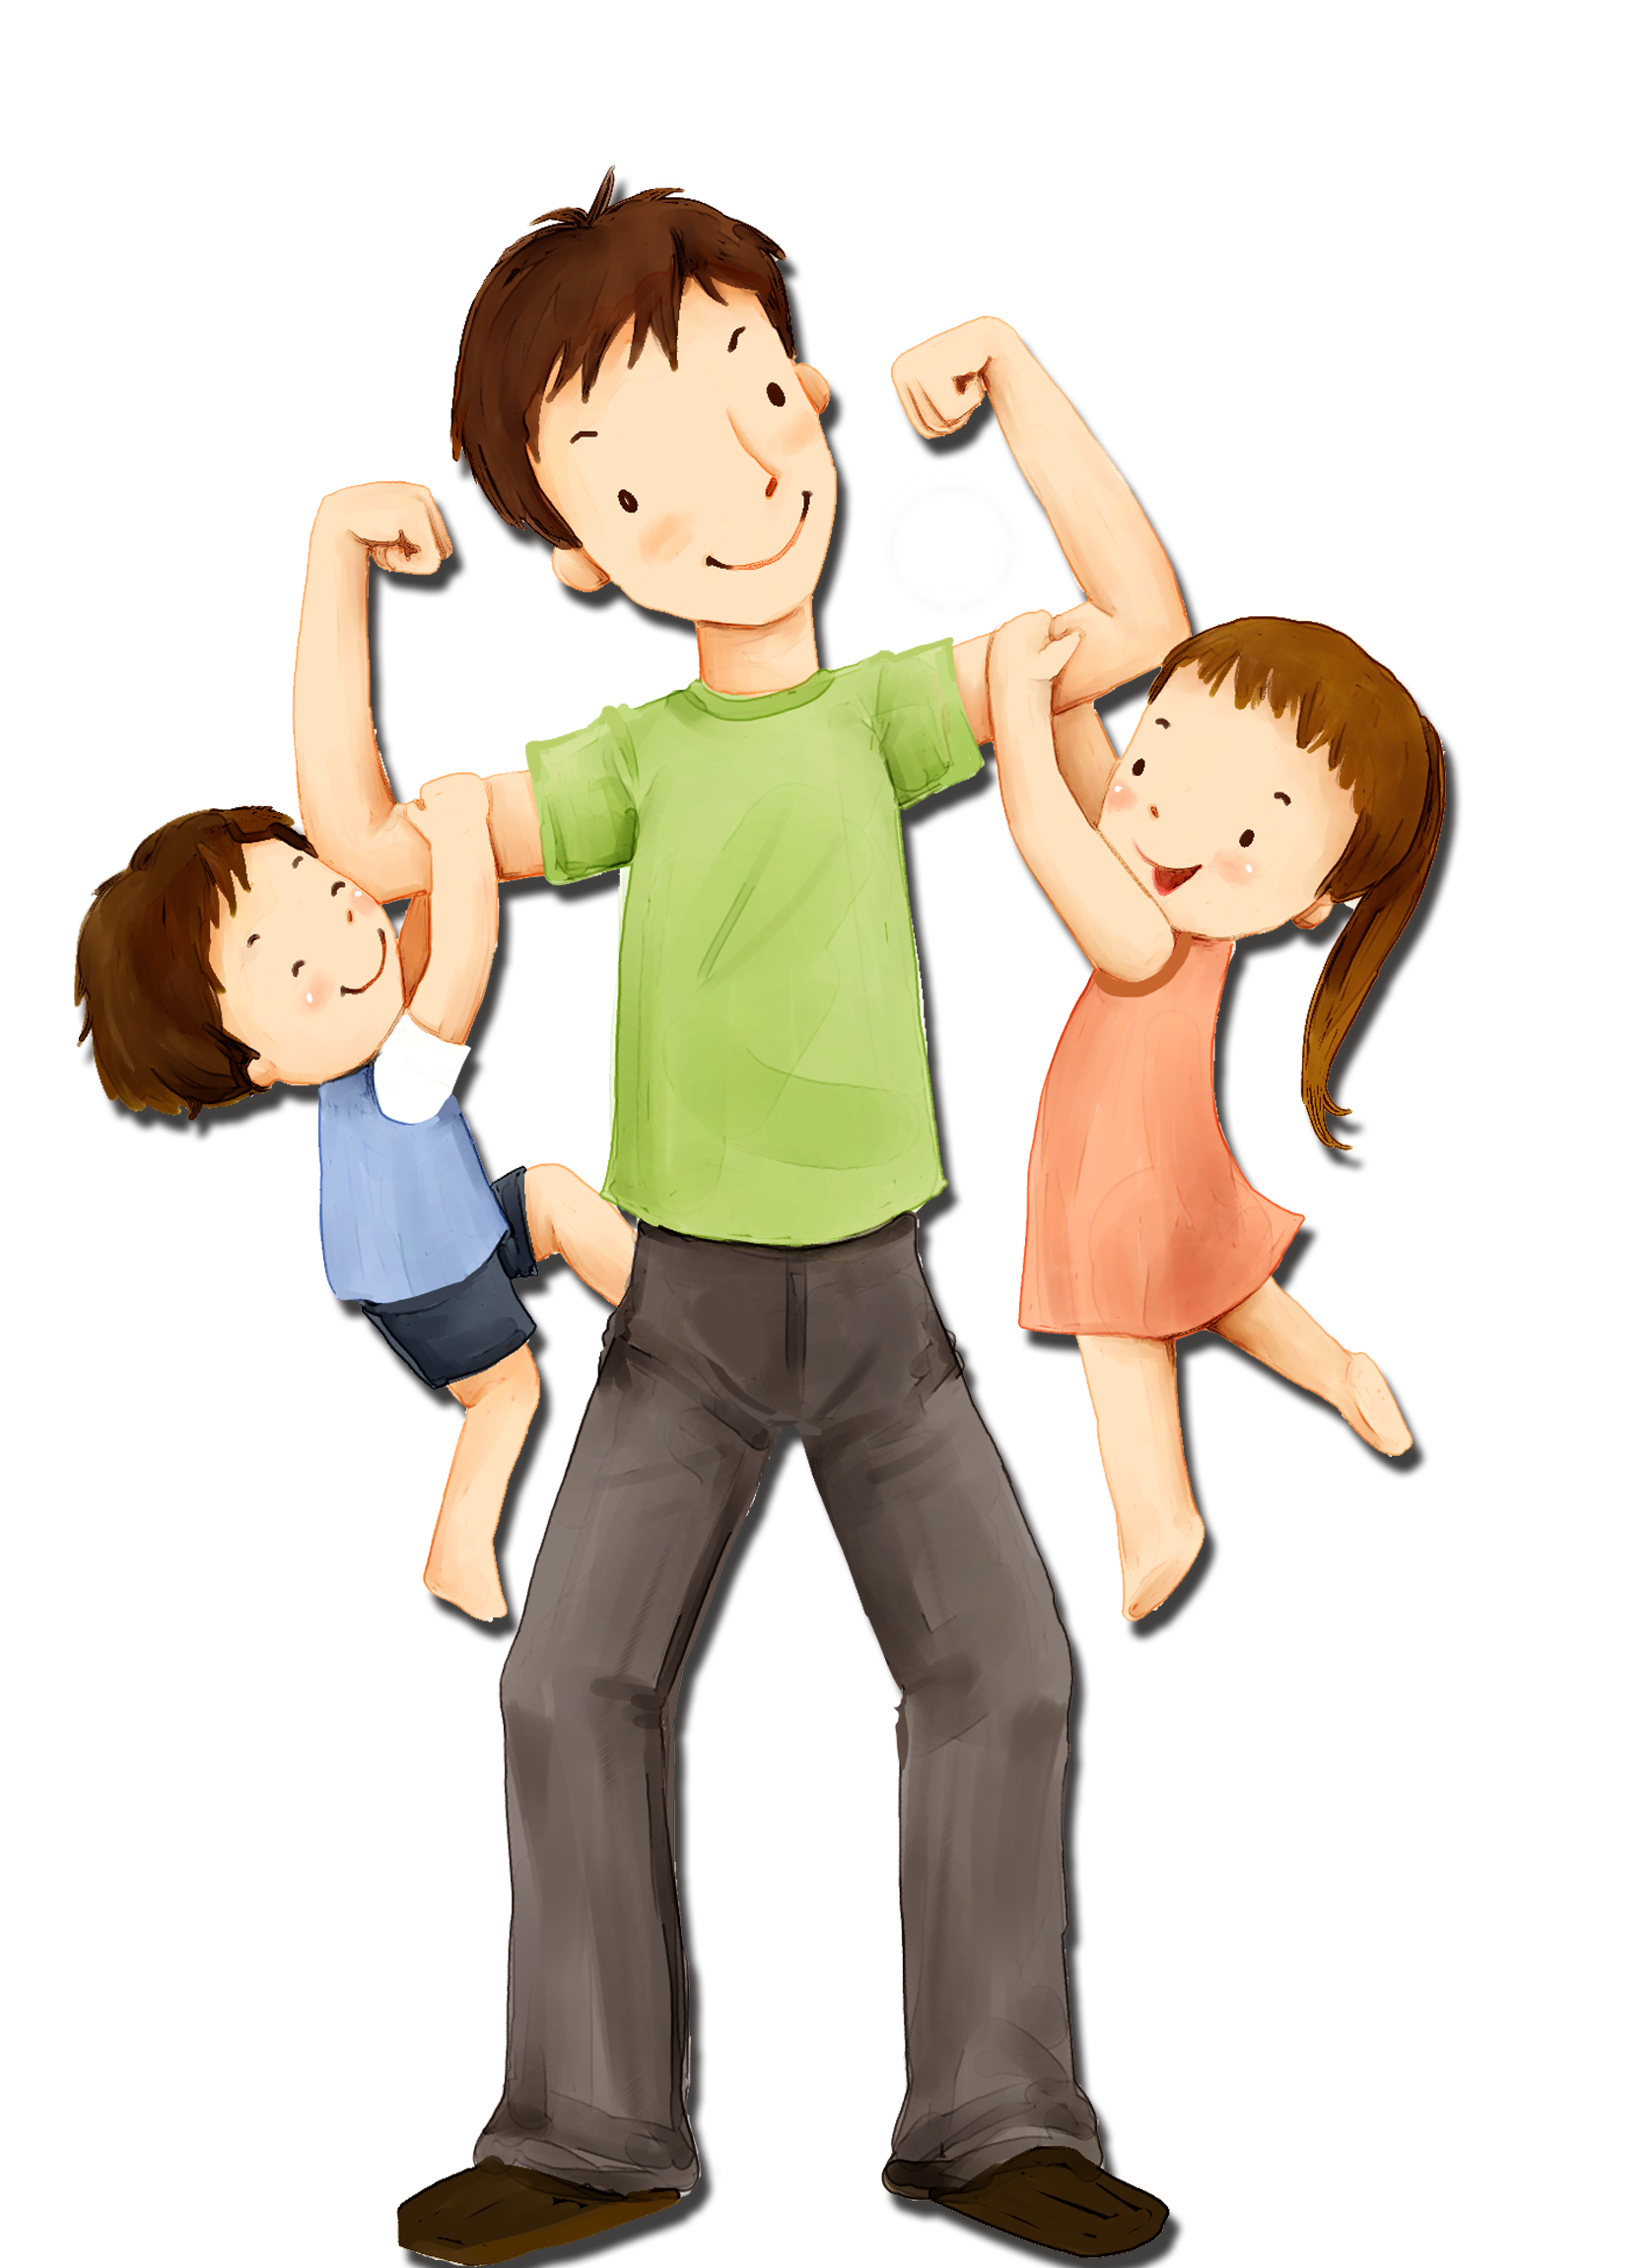 Father clipart boy dad, Father boy dad Transparent FREE for download on